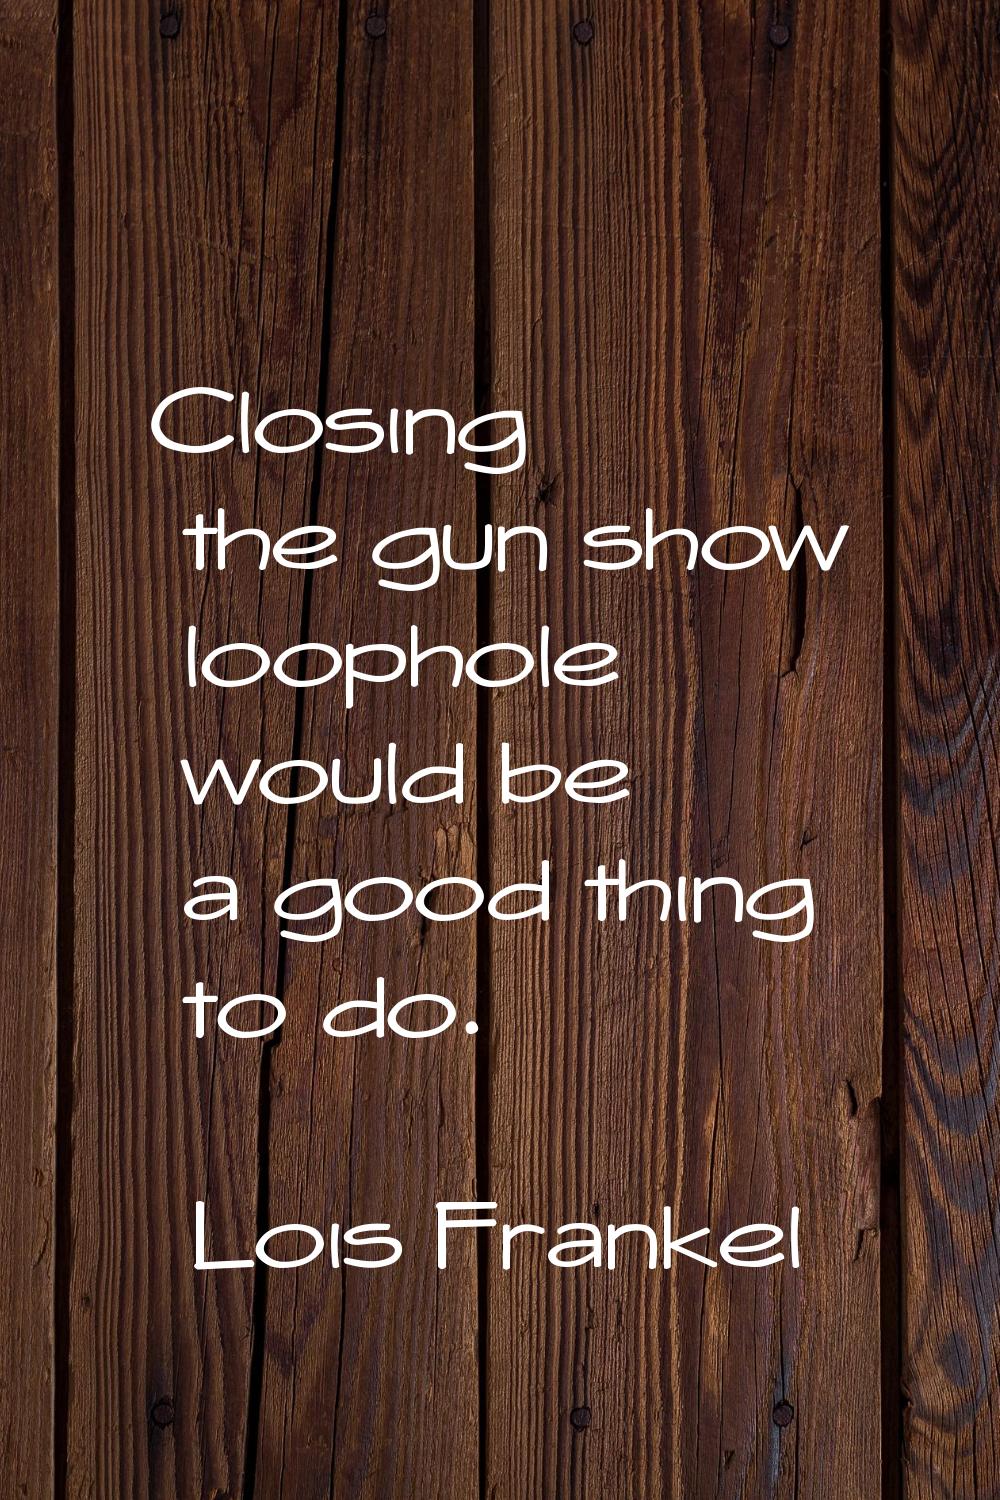 Closing the gun show loophole would be a good thing to do.